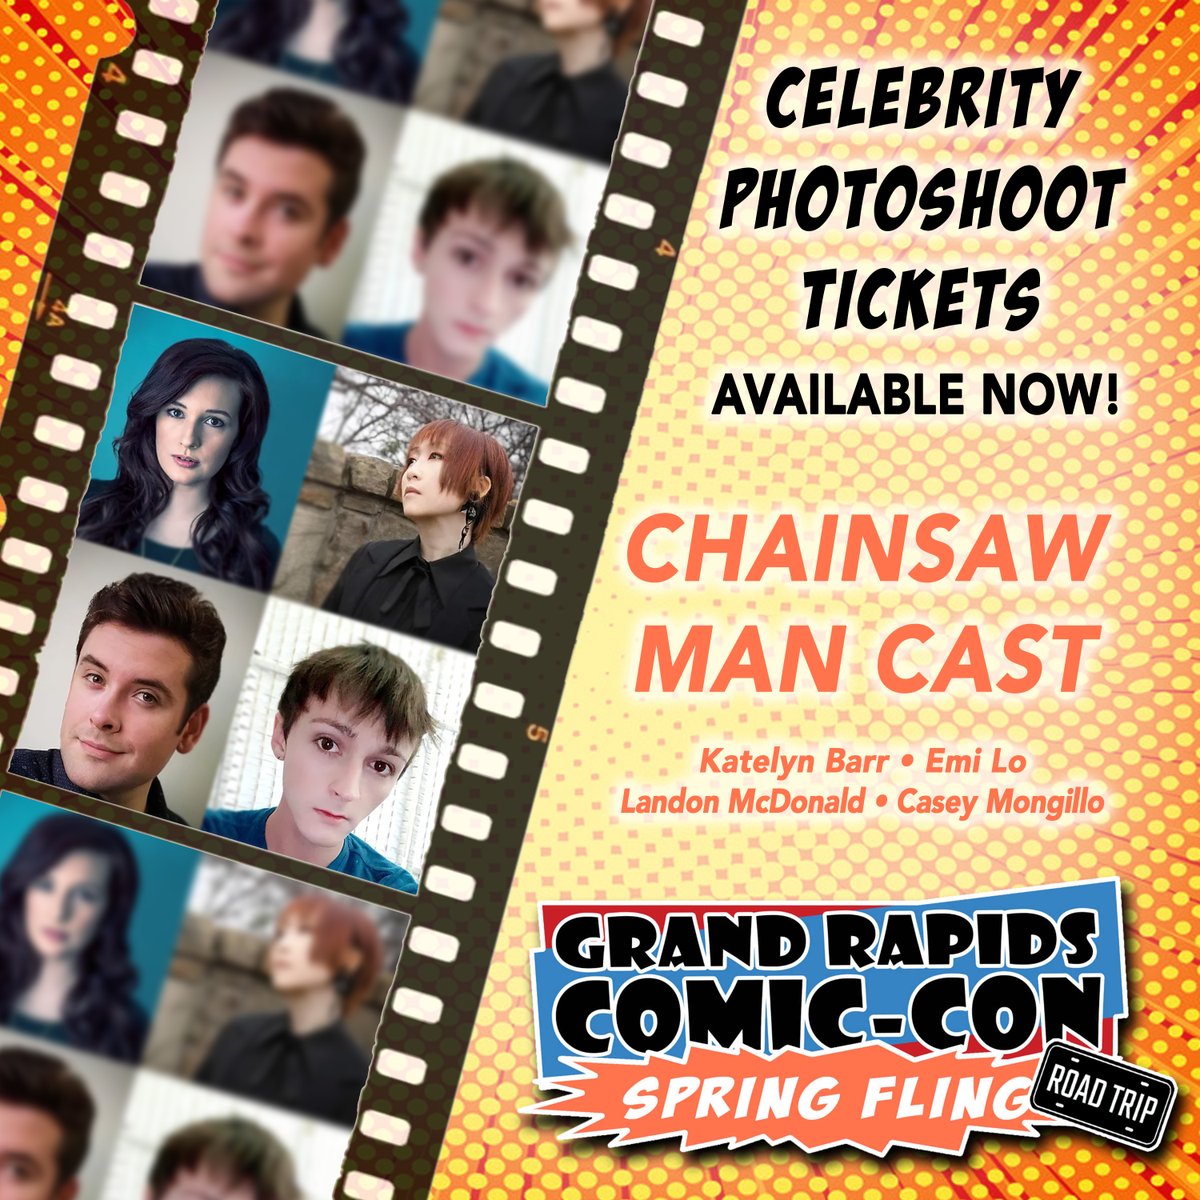 Celebrity Photoshoot tickets are available for pre-order NOW! Beat the lines and get yours online today! bit.ly/3TBPPUj